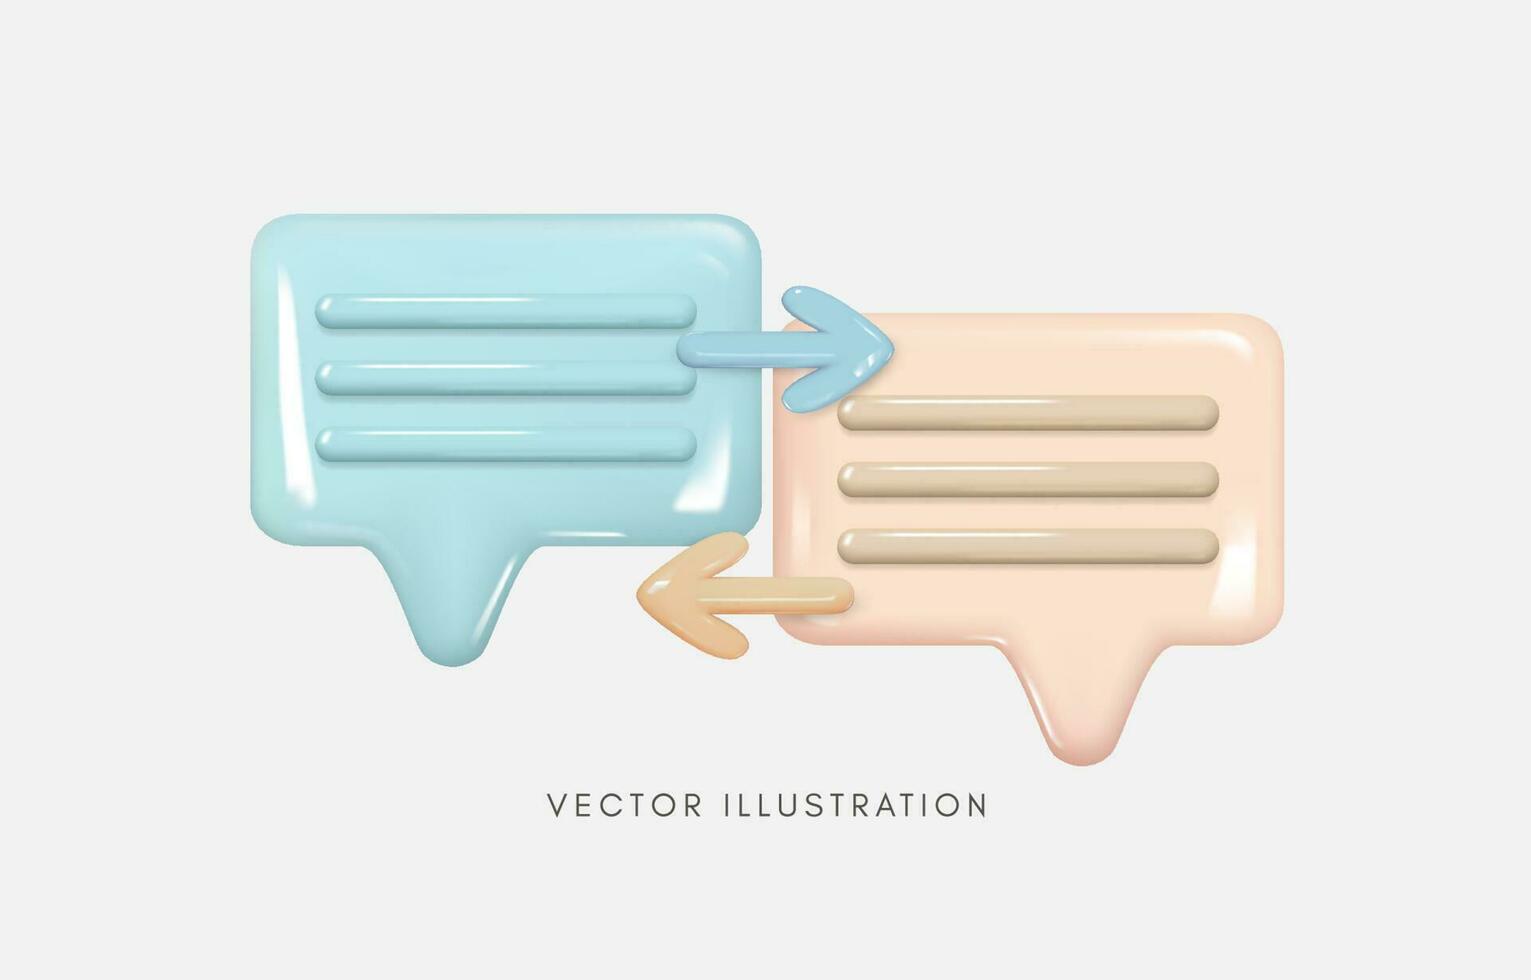 3D speech bubbles with arrows of exchange, sharing idea, exchange of opinion, business communication, team brainstorming concept, Vector illustration.